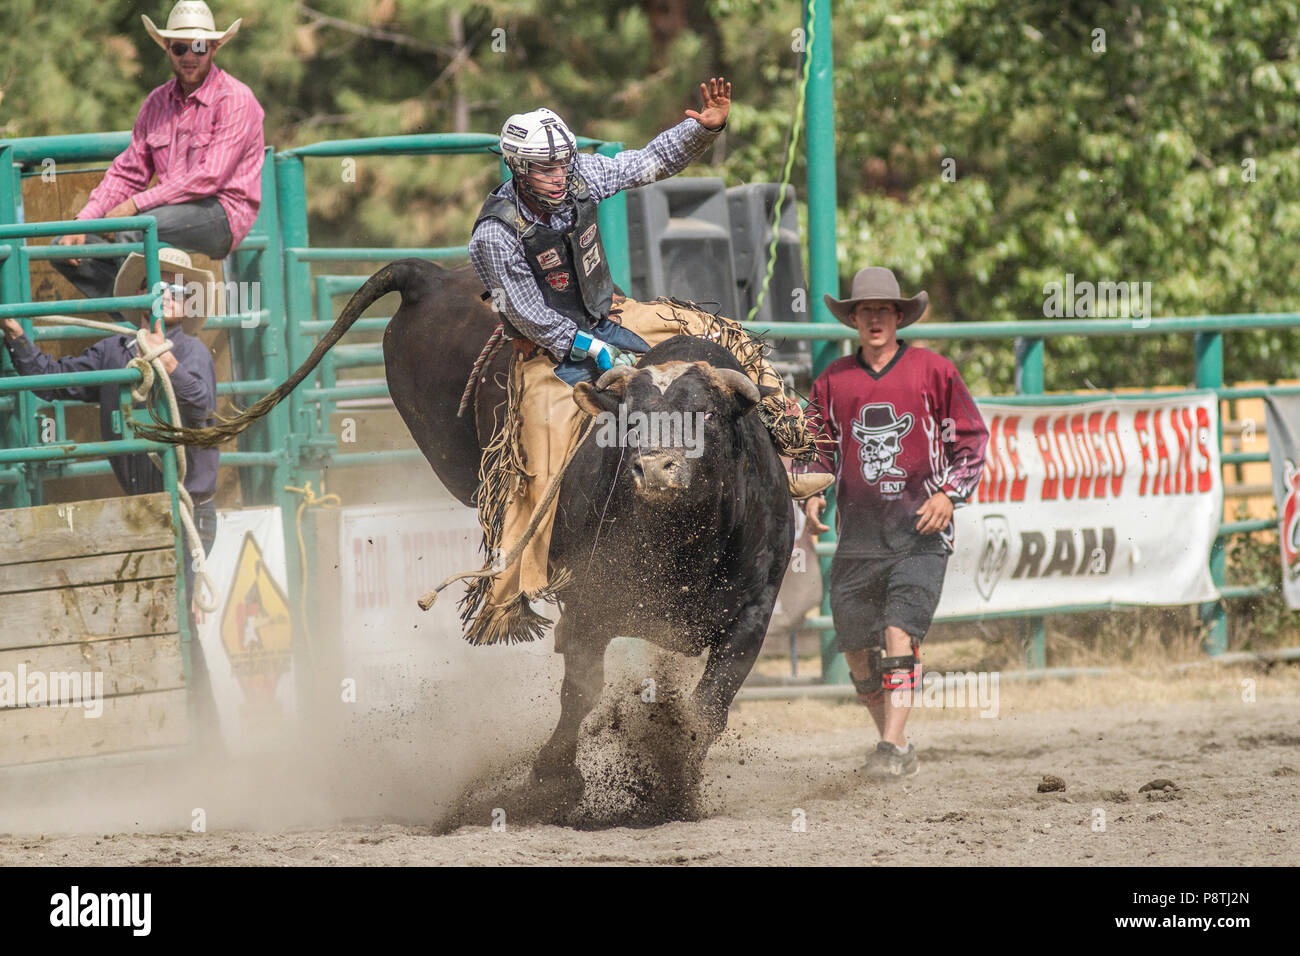 Bull Riding, rodeo's most exciting and dangerous sport. Huge bulls trying to throw the cowboys from there back. Cranbrook, BC, Canada. Riker Carter rd Stock Photo